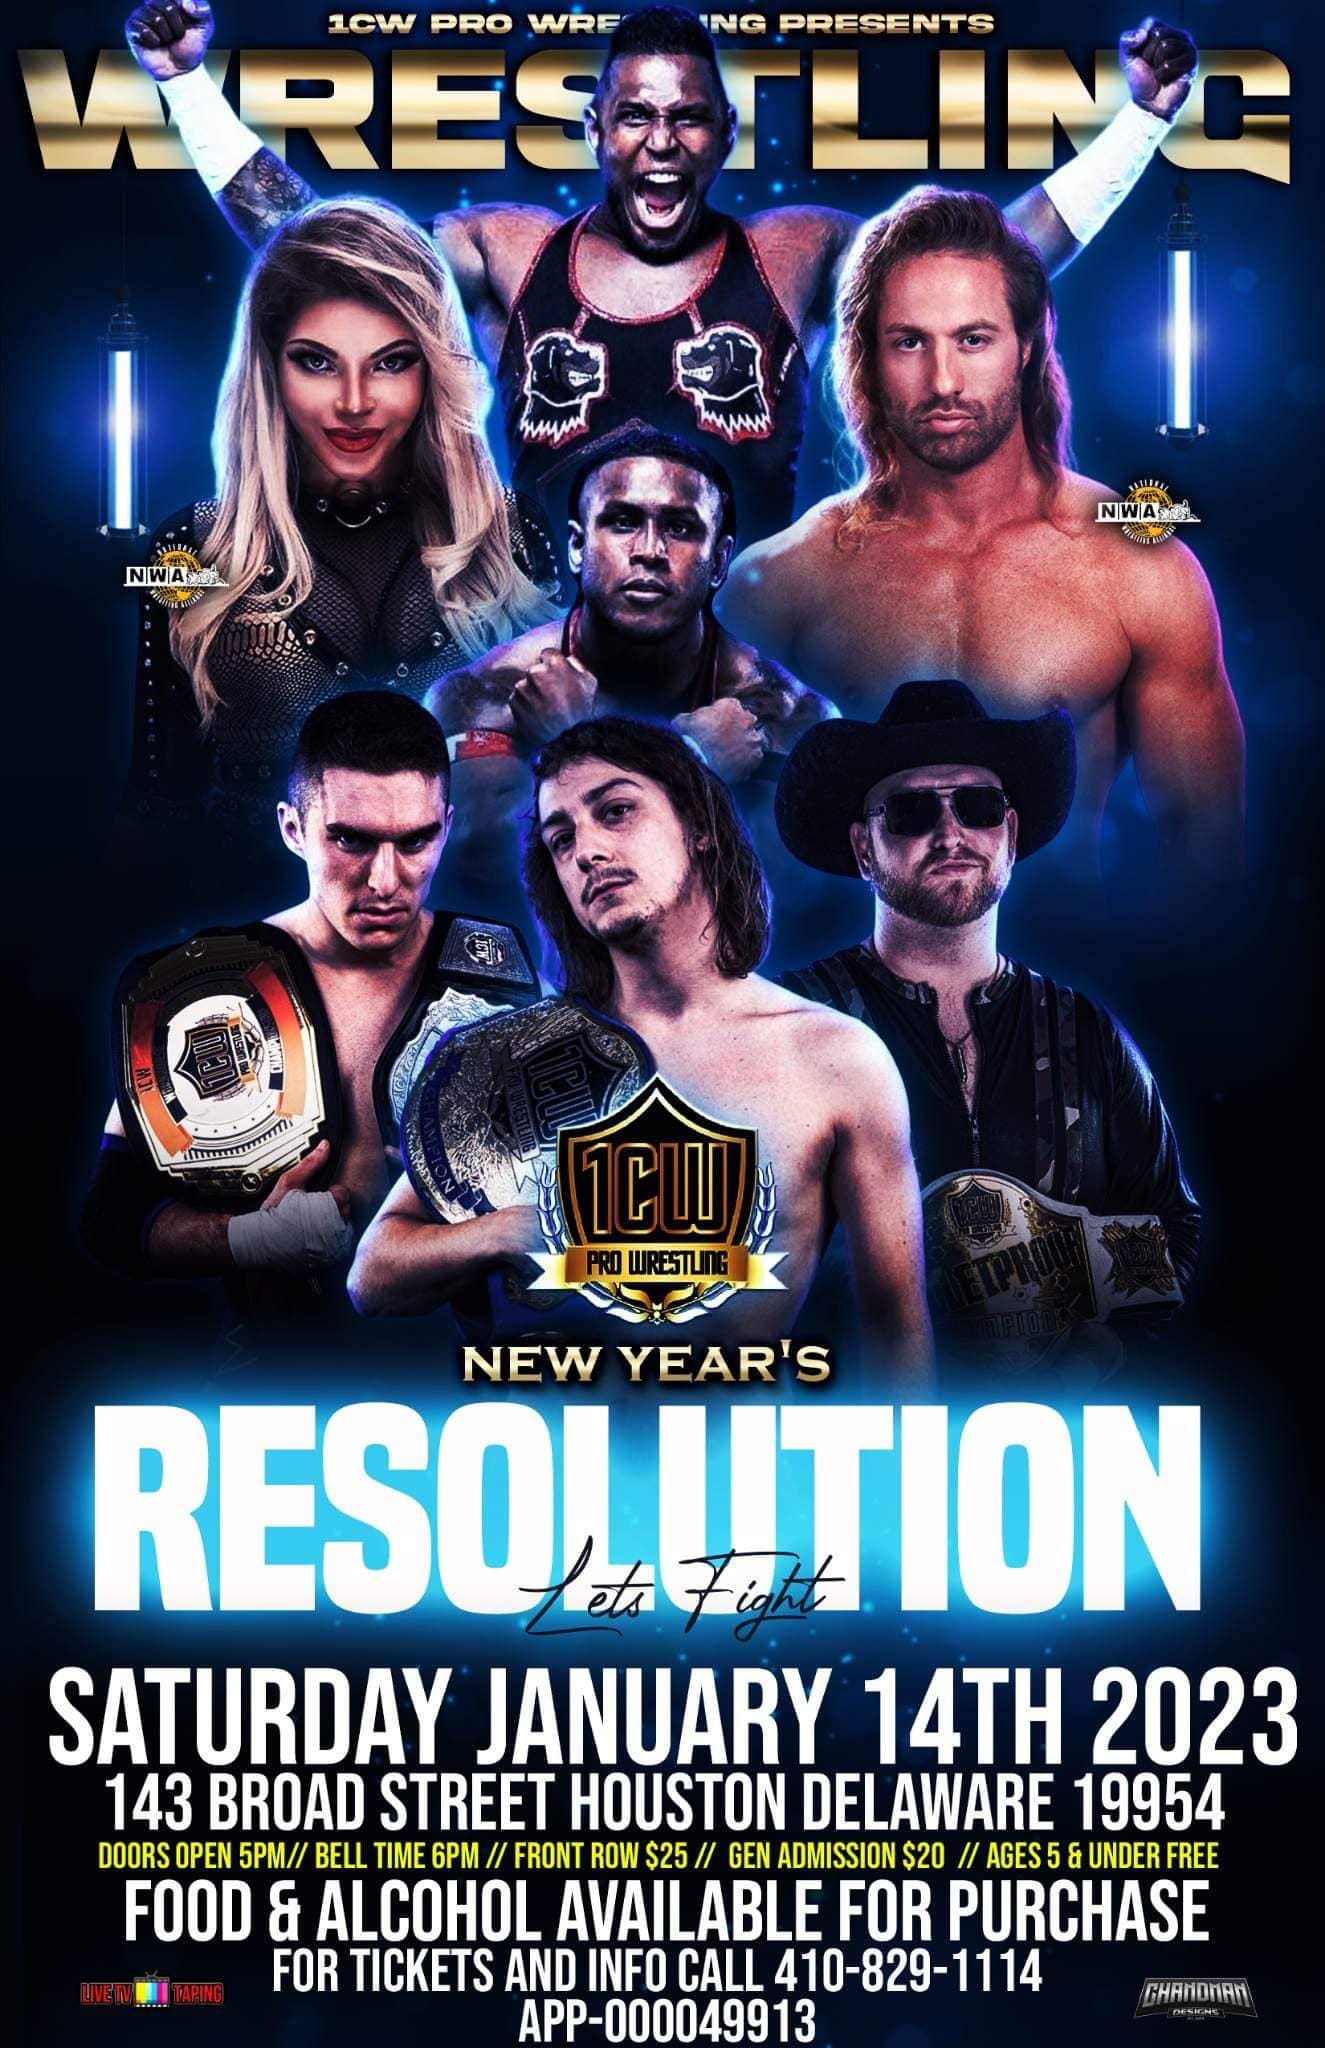 May be an image of 4 people and text that says '1CW PRO WRE ING PRESENTS RESENT mMM NWASE NWA NEW YEAR'S RESOL UTION SATURDAY JANUARY 14TH 2023 143 BROAD STREET HOUSTON DELAWARE 19954 DOORSOPEN 5PM// BELL TIME 6PM FRONT ROW $25 GEN ADMISSION$2 AGES5&NDFEE FOOD & ALCOHOL AVAILABLE FOR PURCHASE FOR TICKETS AND INFO CALL 410-829-1114 APP-00004991 CHANDMAN'